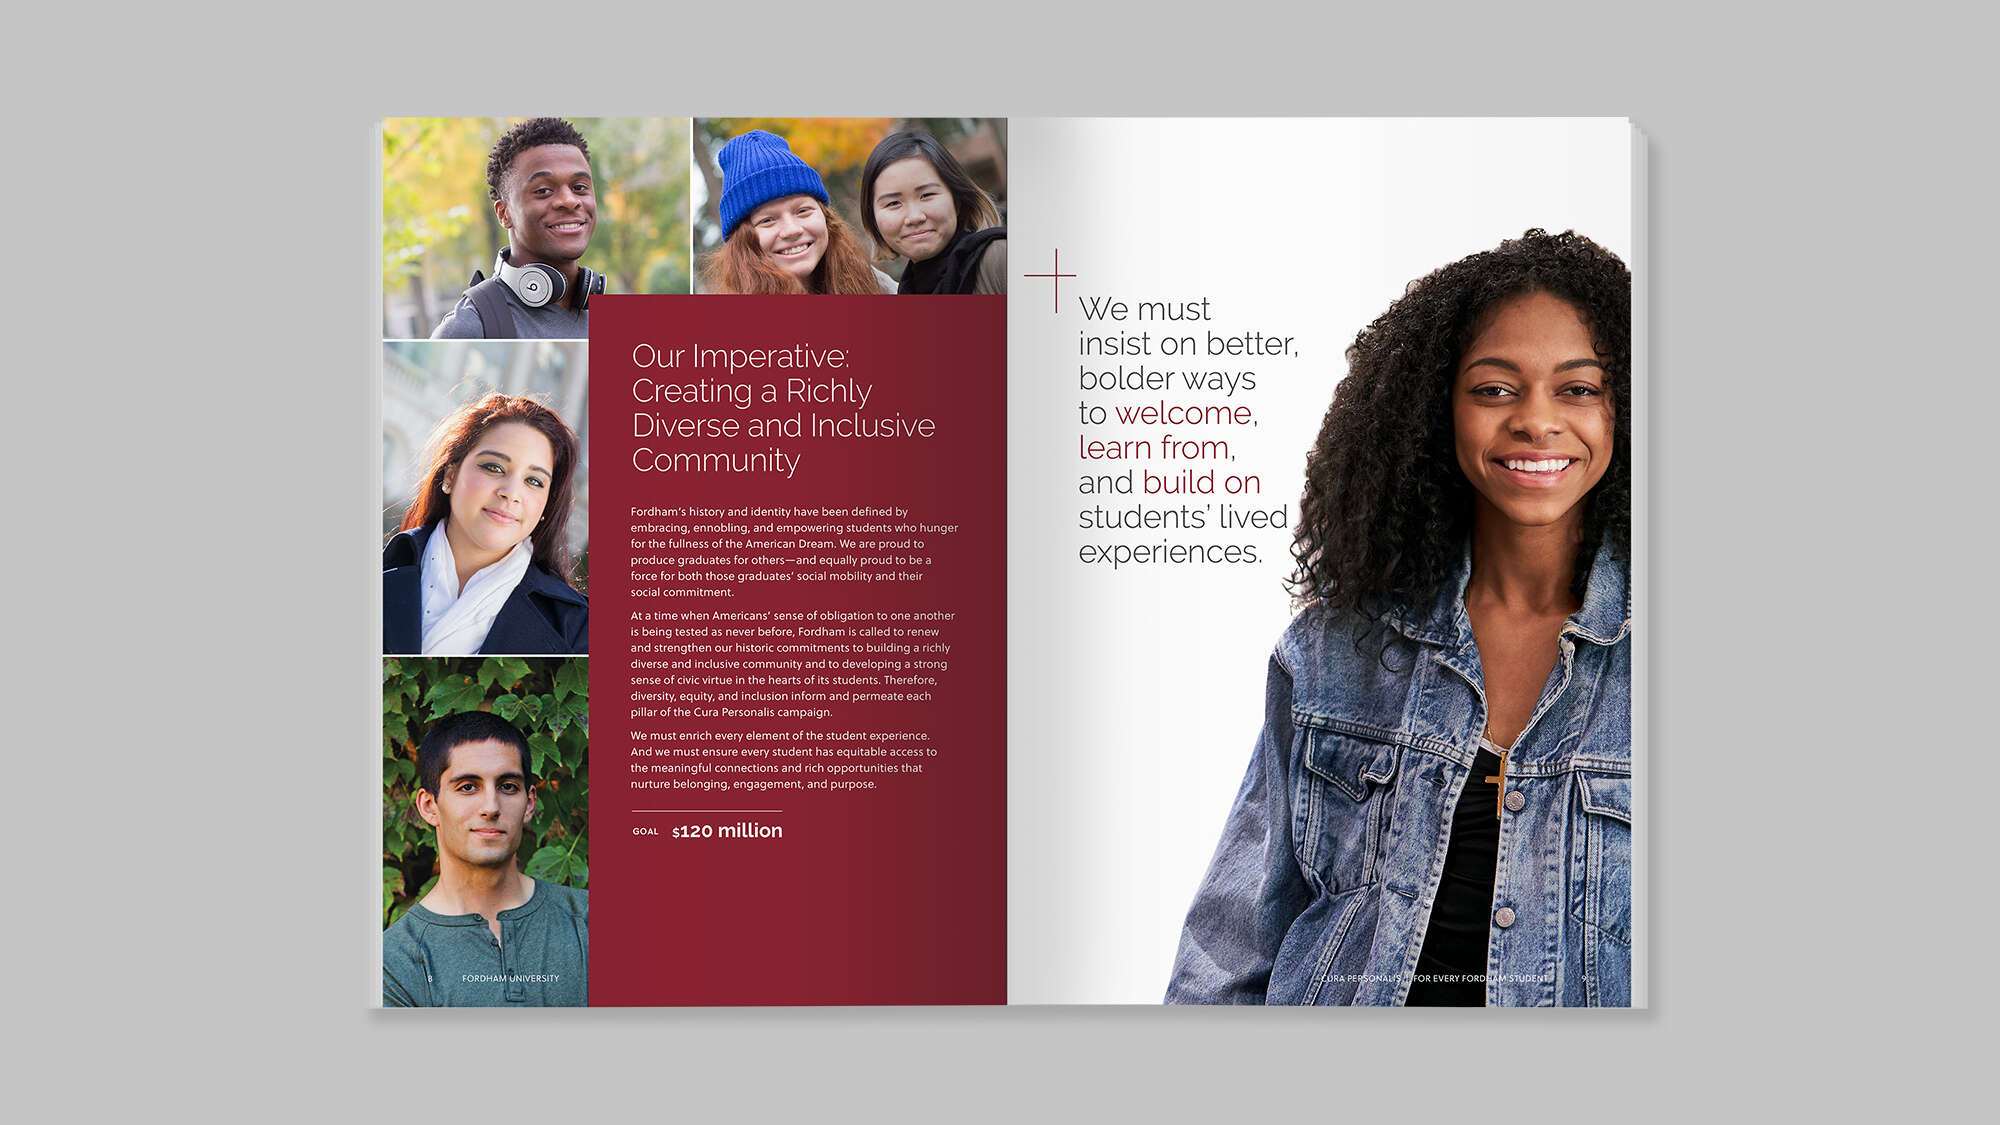 viewbook spread: Our Imperative: Creating a Richly Diverse and Inclusive Community